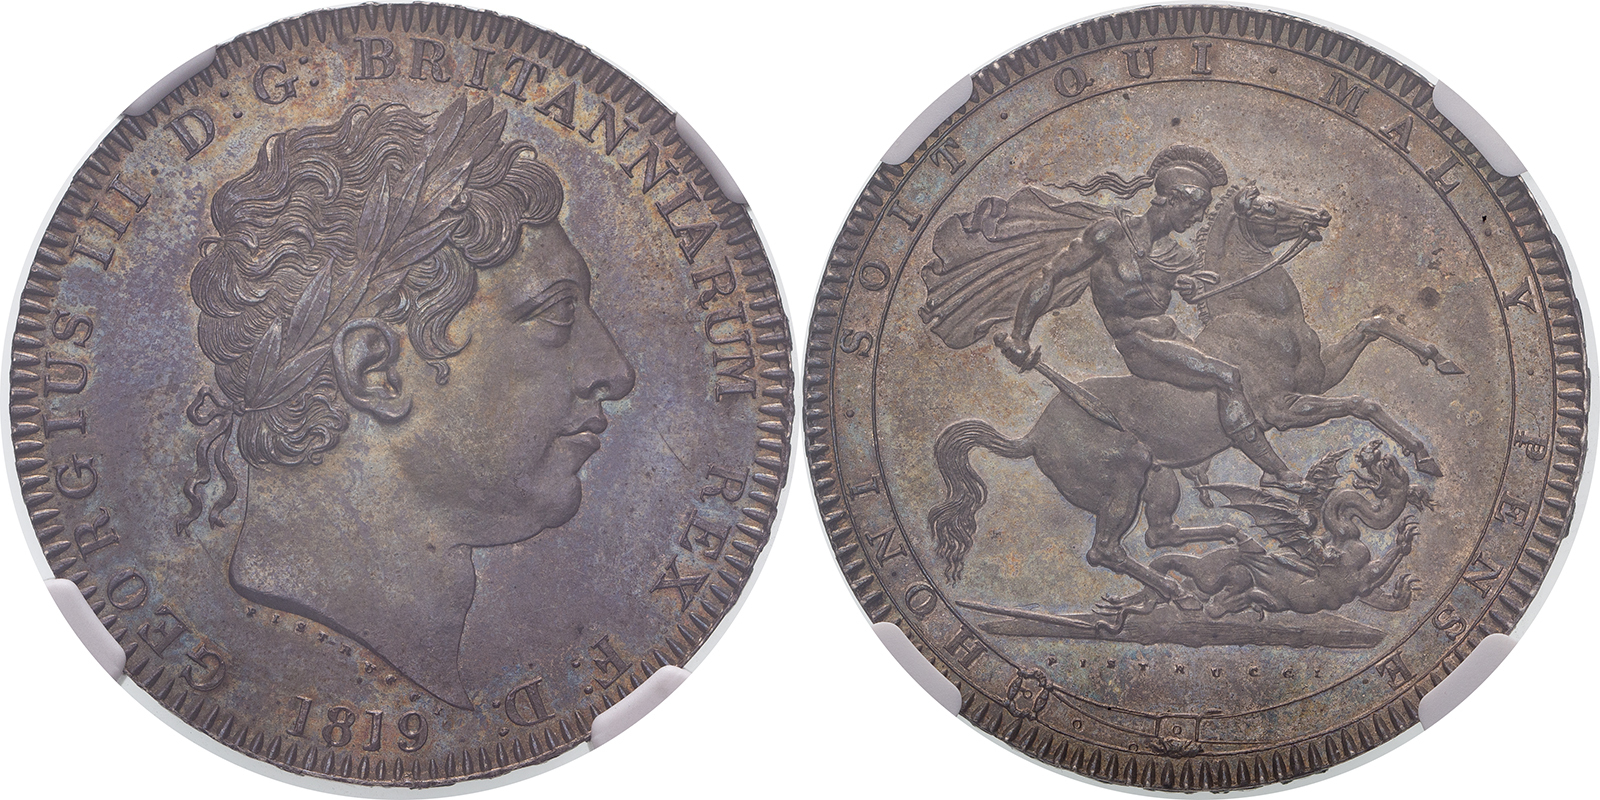 Lot 30: 1819 Silver Crown LIX on edge NGC MS 65 #6058405-006